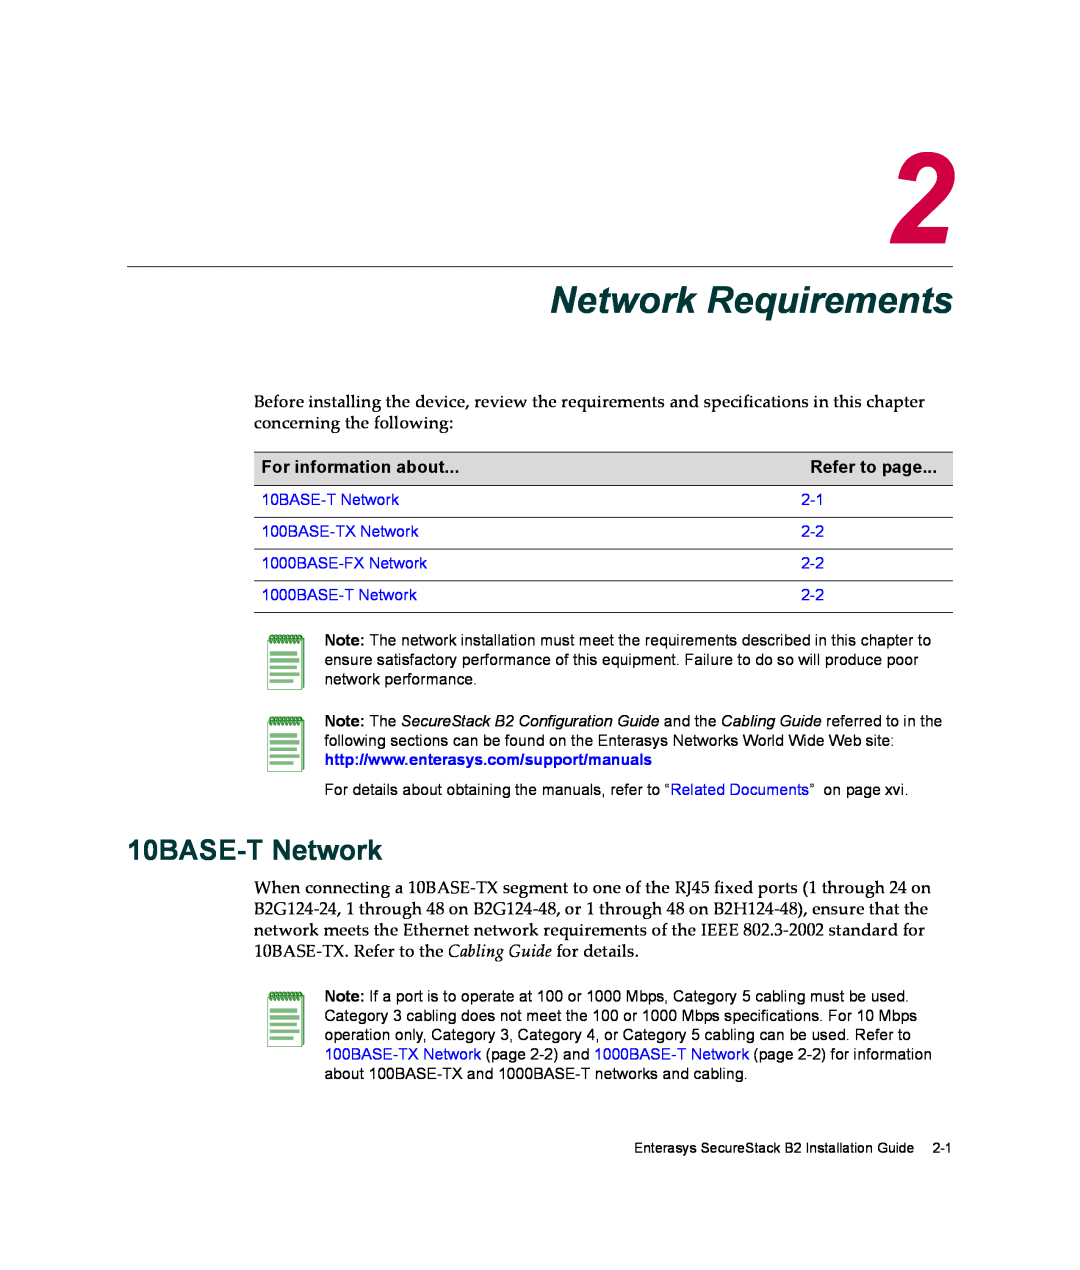 Enterasys Networks B2G124-24 manual Network Requirements, 10BASE-T Network, For information about, Refer to page 